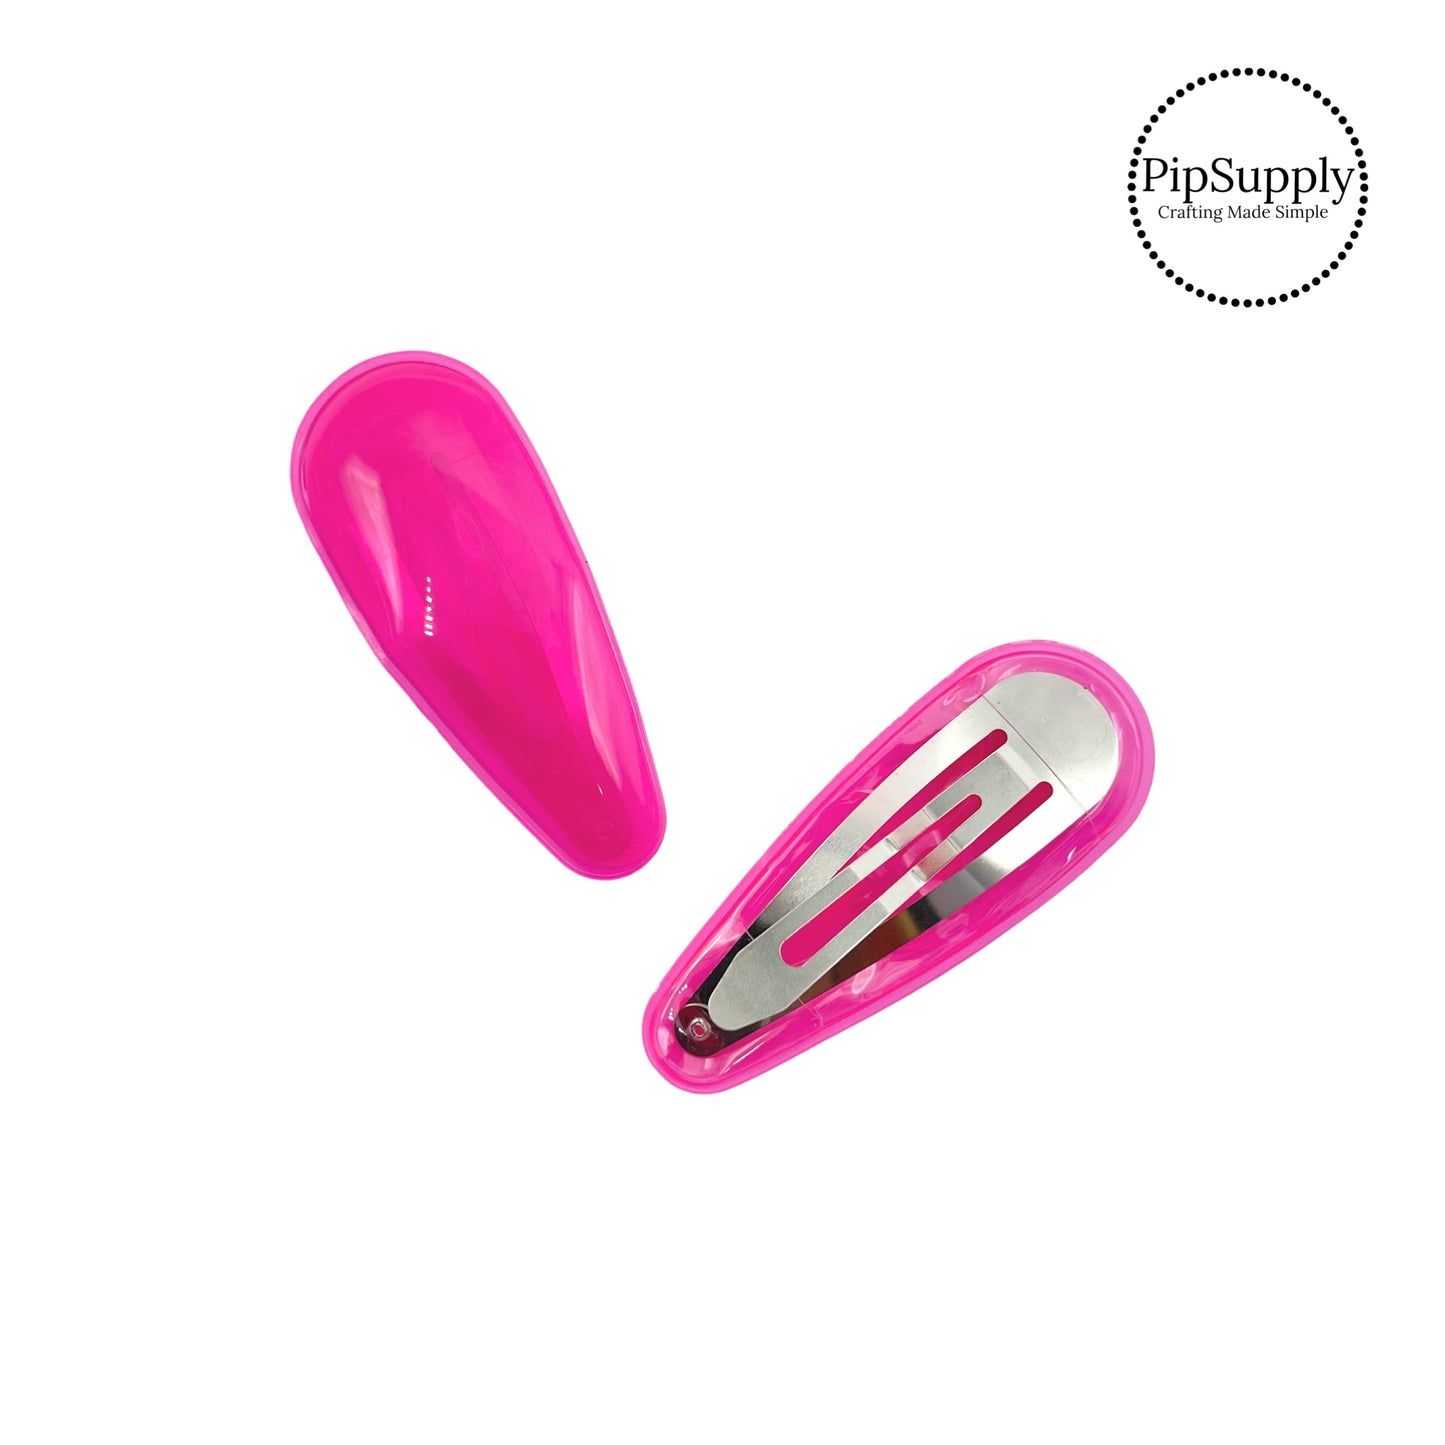 Solid jelly bright pink shaker hair clip